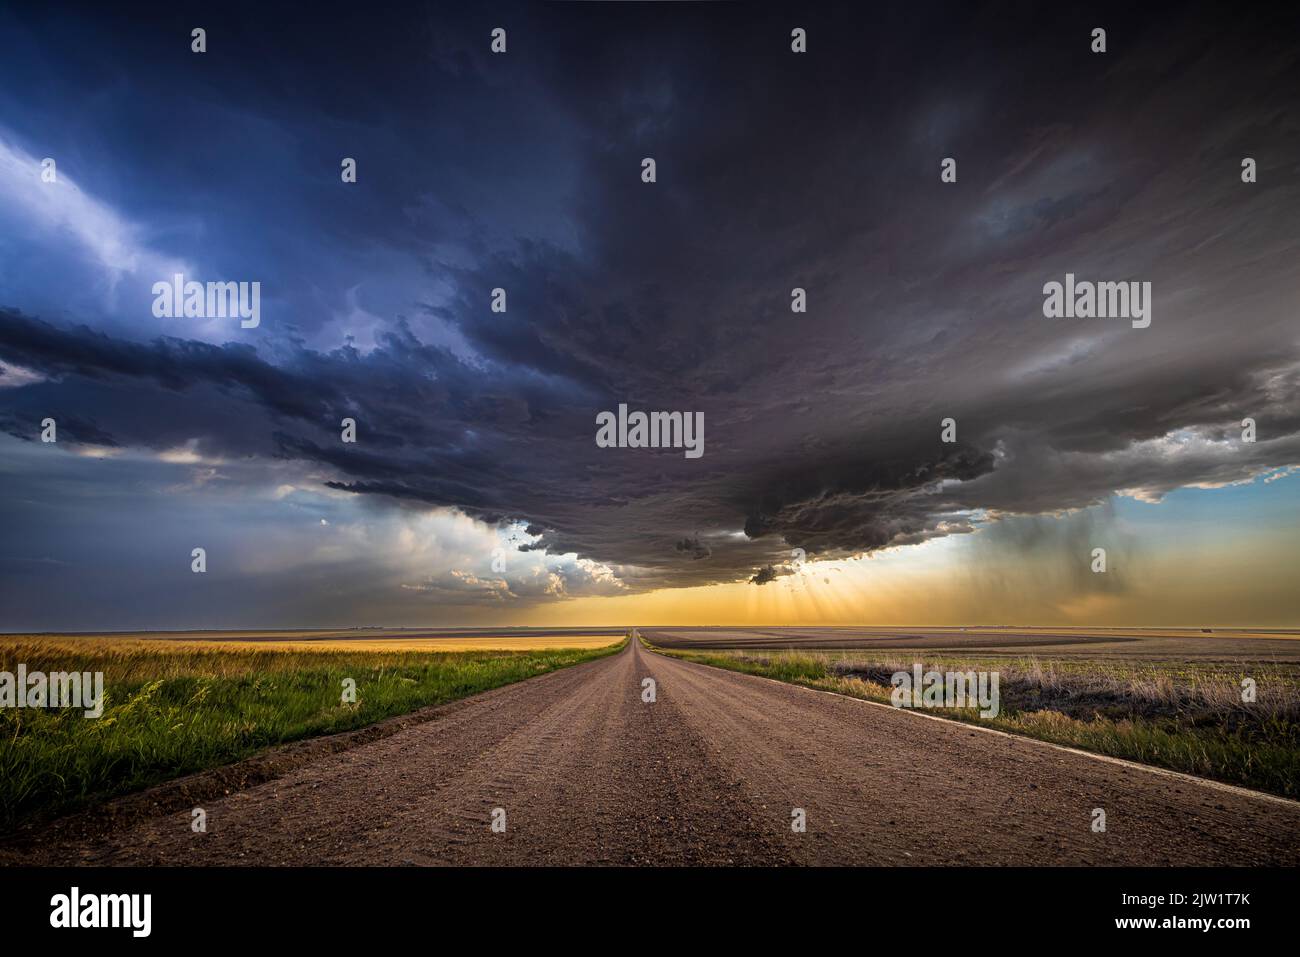 Storrmy skies over rural road near Grinnell, Kansas Stock Photo